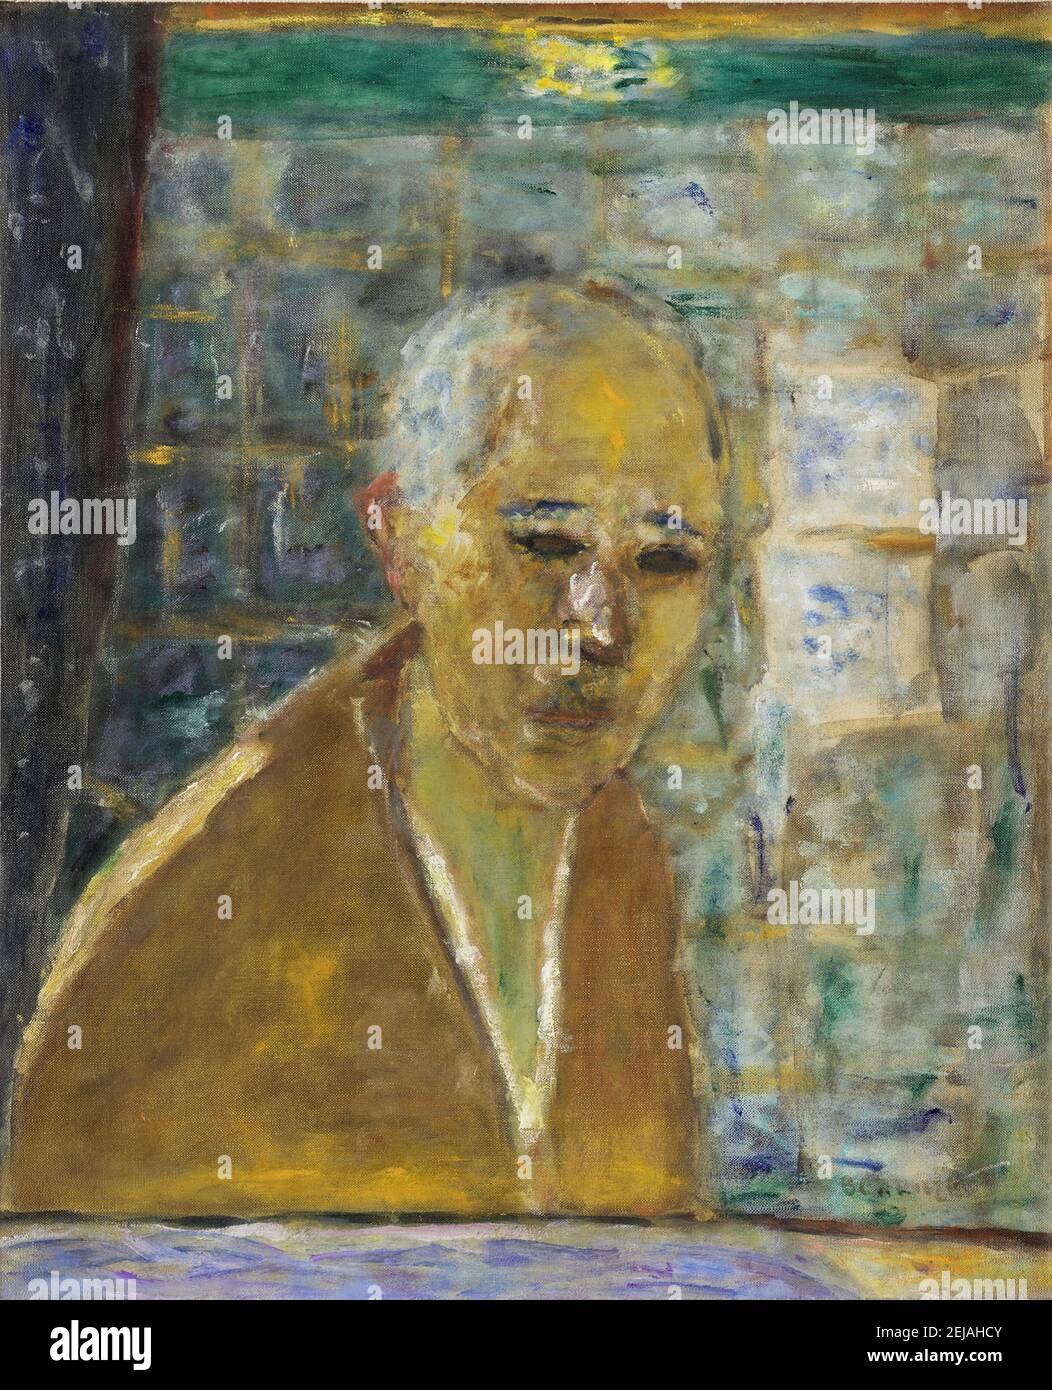 Self-Portrait at the age of 78. Museum: Fondation Bemberg, Toulouse. Author: PIERRE BONNARD. Stock Photo